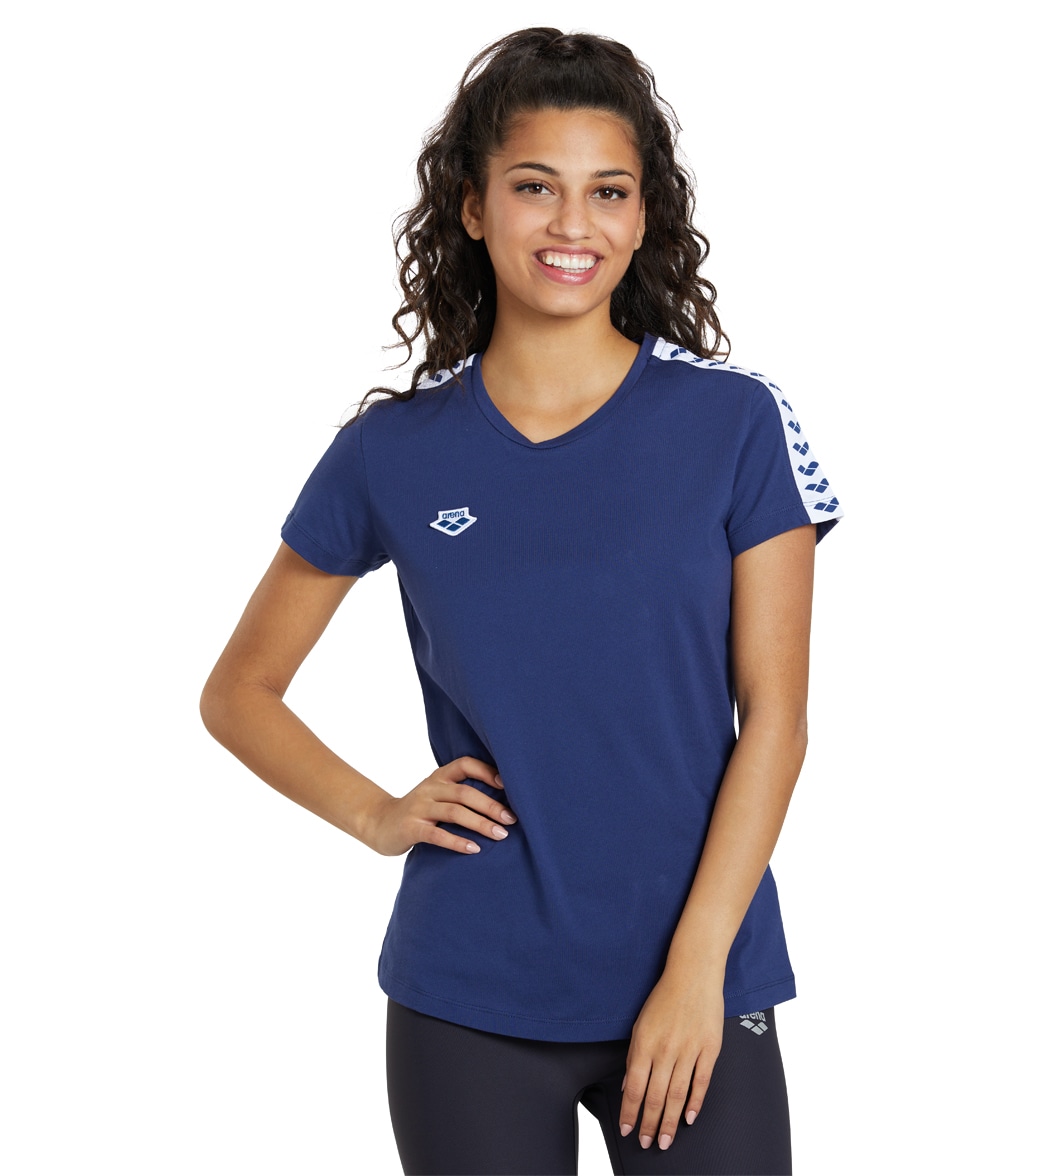 Arena Women's Icons Team Short Sleeve T-Shirt - Navy/White/Navy Large Cotton - Swimoutlet.com